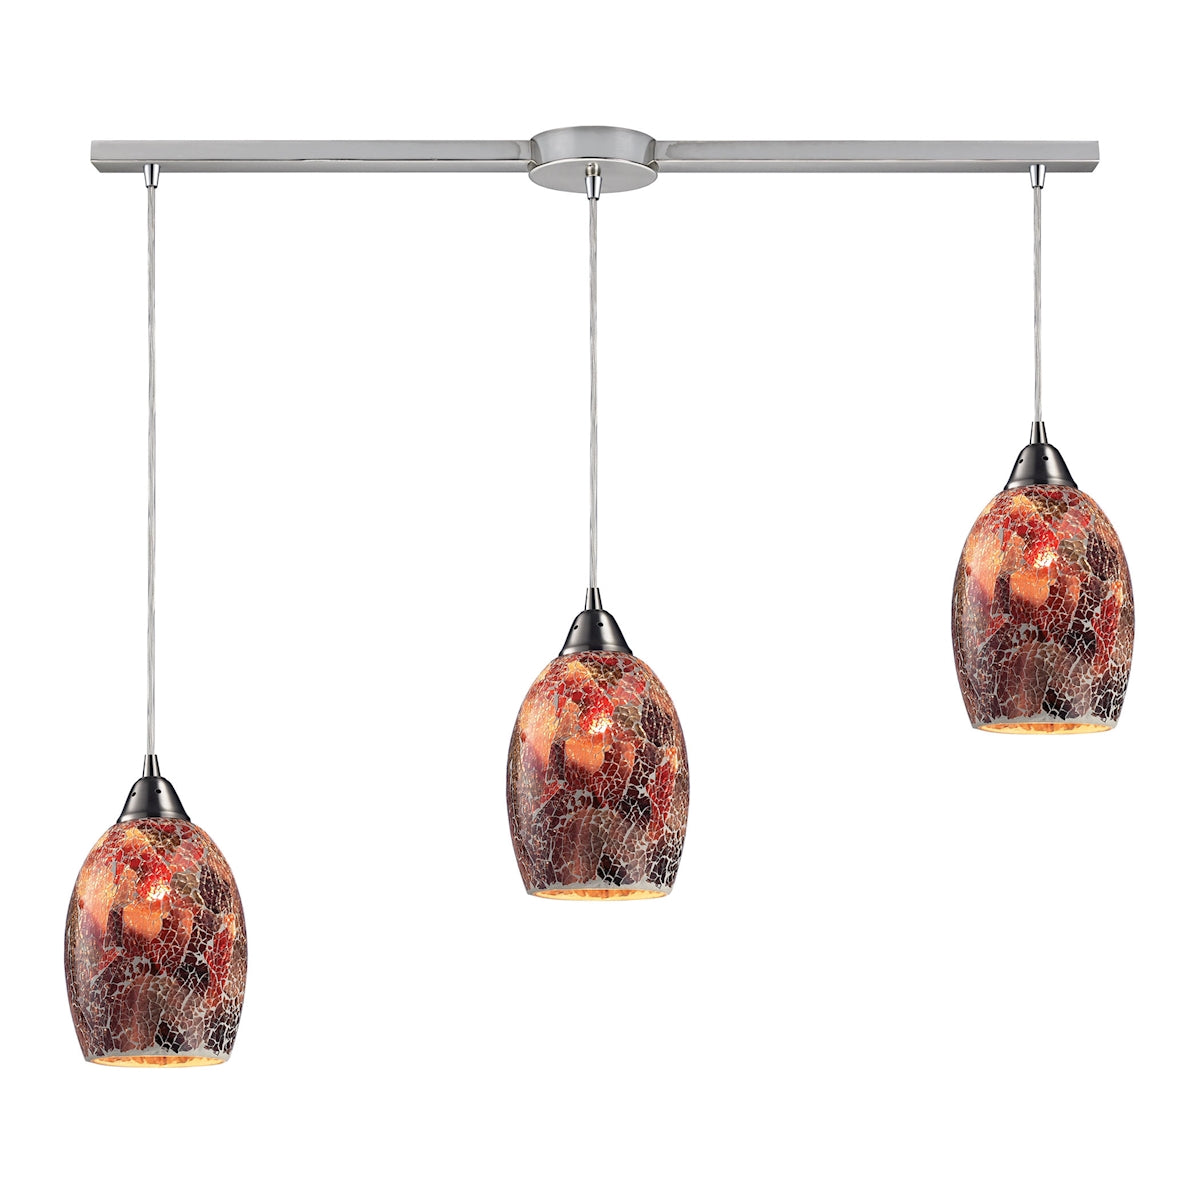 ELK Lighting 73031-3L Avalon 3-Light Linear Pendant Fixture in Satin Nickel with Multi-colored Crackle Glass